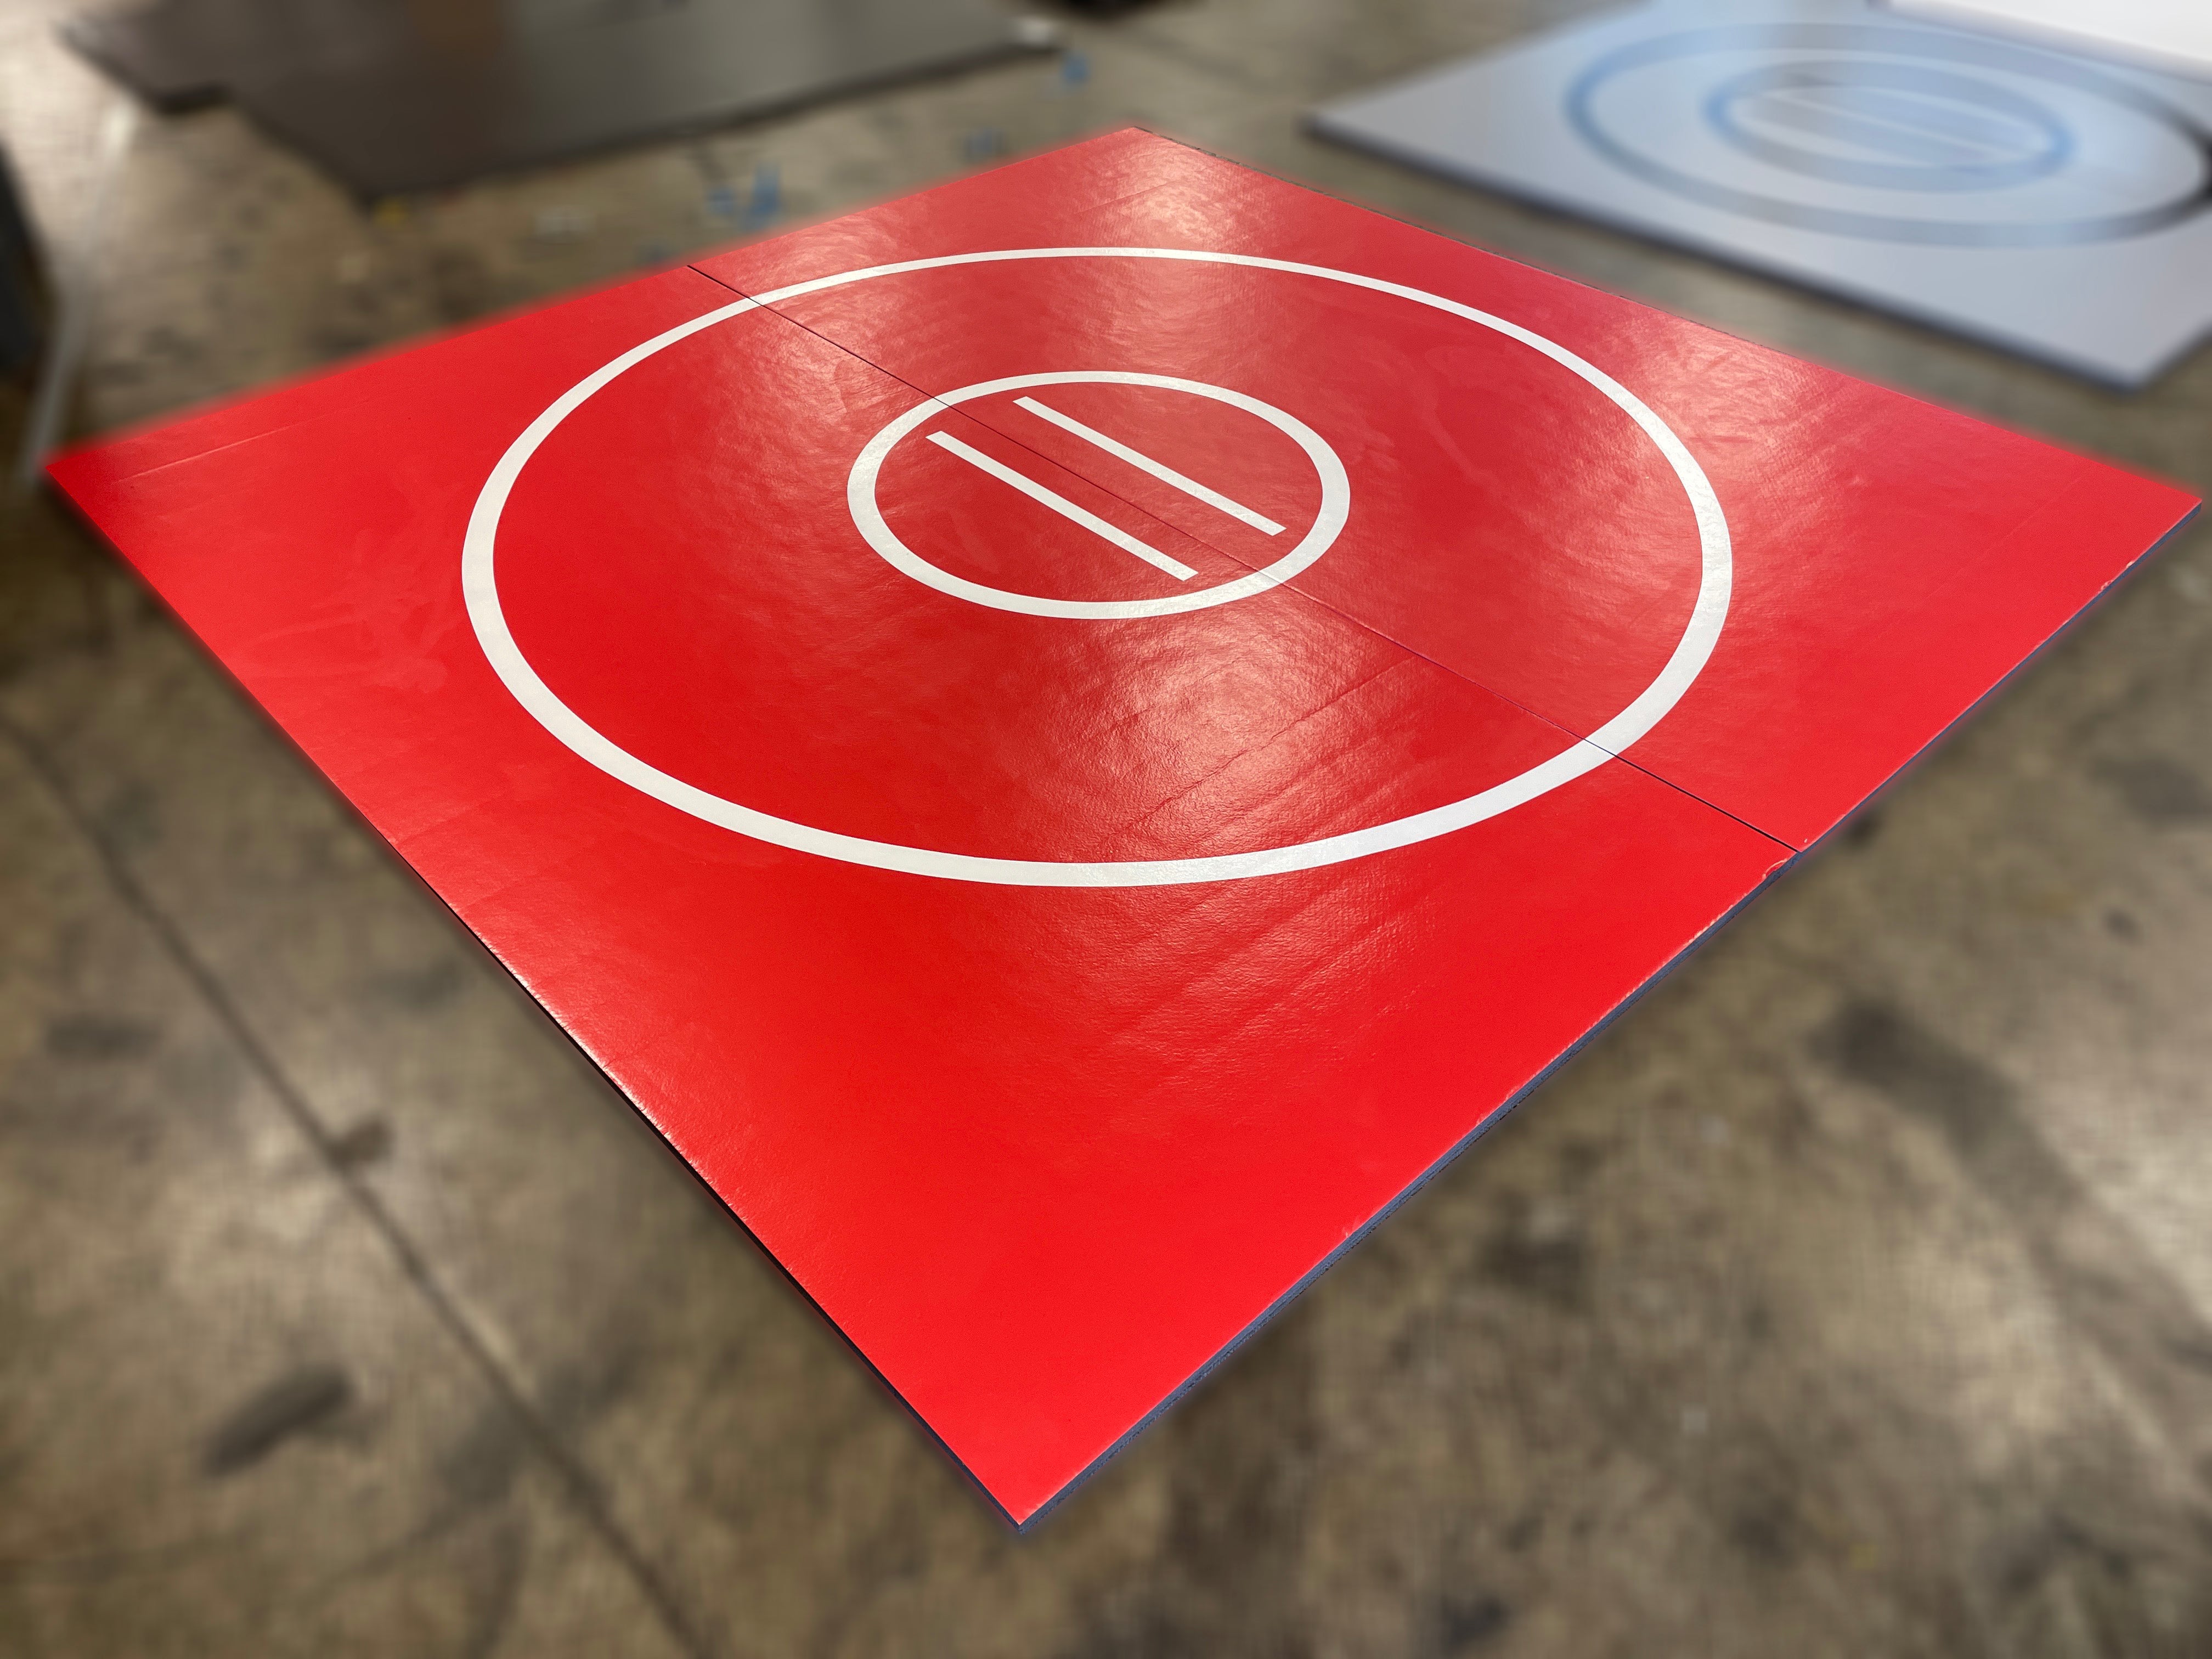 Clearance 10' x 10' x 1 3/8" Roll-Up Wrestling mat Red with White